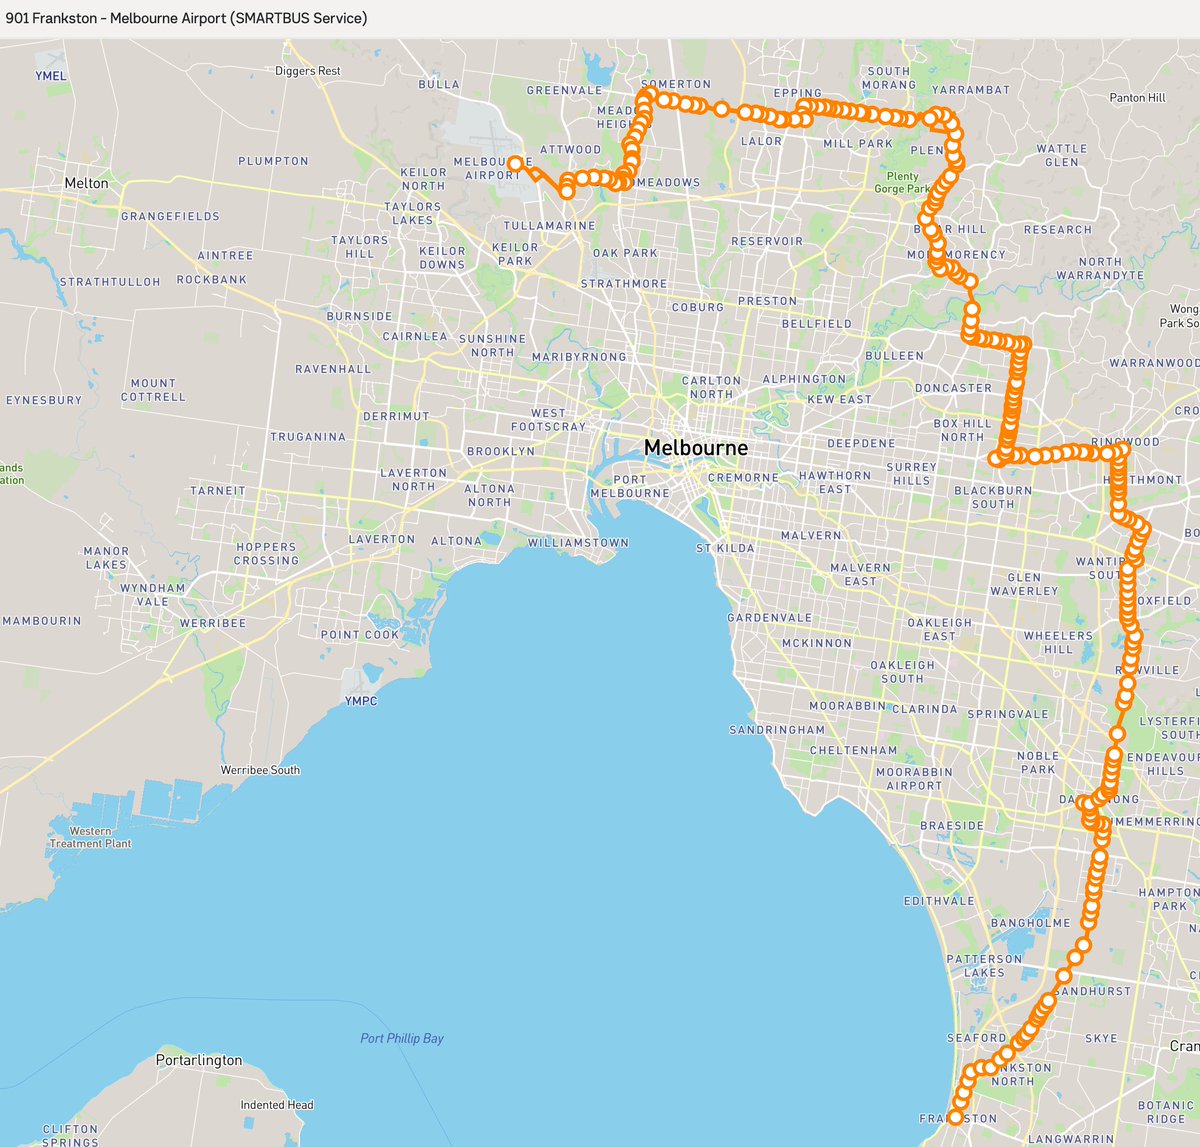 On ABC774 this morning, @JohnPesutto told @Raf_Epstein there's a bus that takes a similar route to the SRL, and low patronage suggests lack of demand for the SRL. The 901 bus departs Frankston 8.05am and takes 4 hours 11 mins to get to Melb Airport. I will never get this bus.